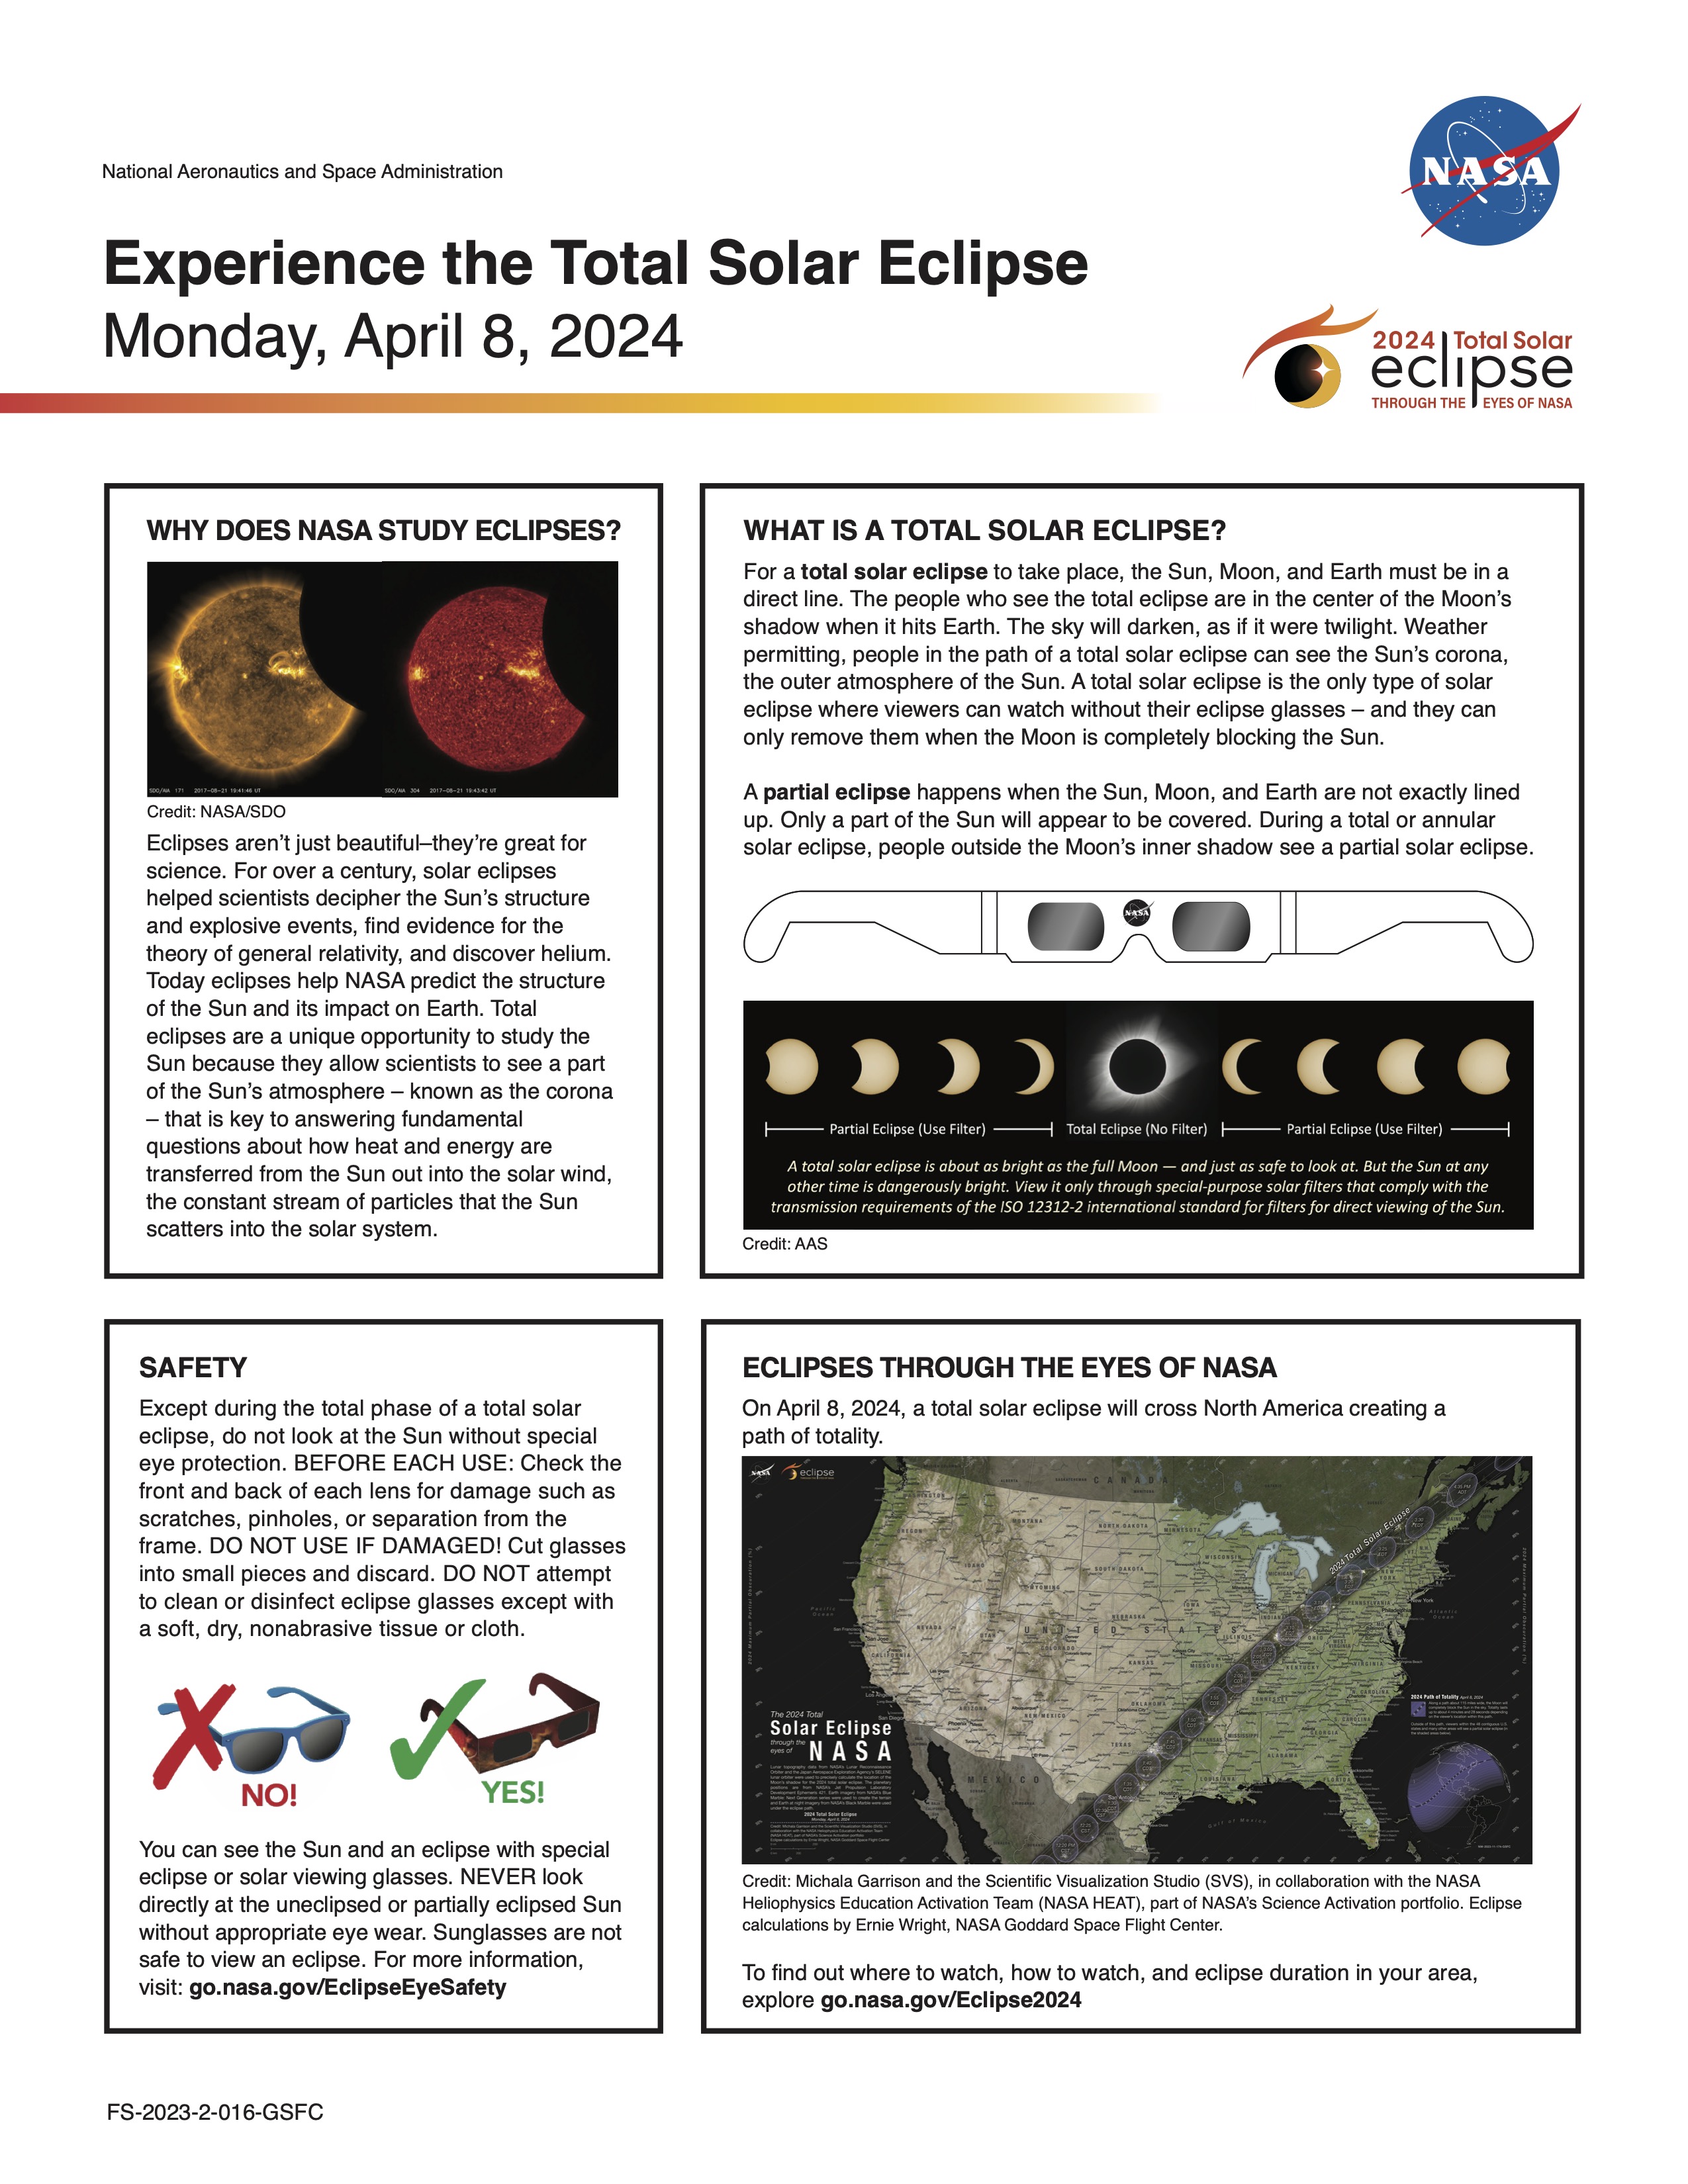 The front of the total solar eclipse fact sheet, showing the title "Experience the Total Solar Eclipse, Monday, April 8, 2024" and blocks of text about why NASA studies eclipses, how to safely watch the eclipse, what is a total solar eclipse, and eclipses through the eyes of NASA.